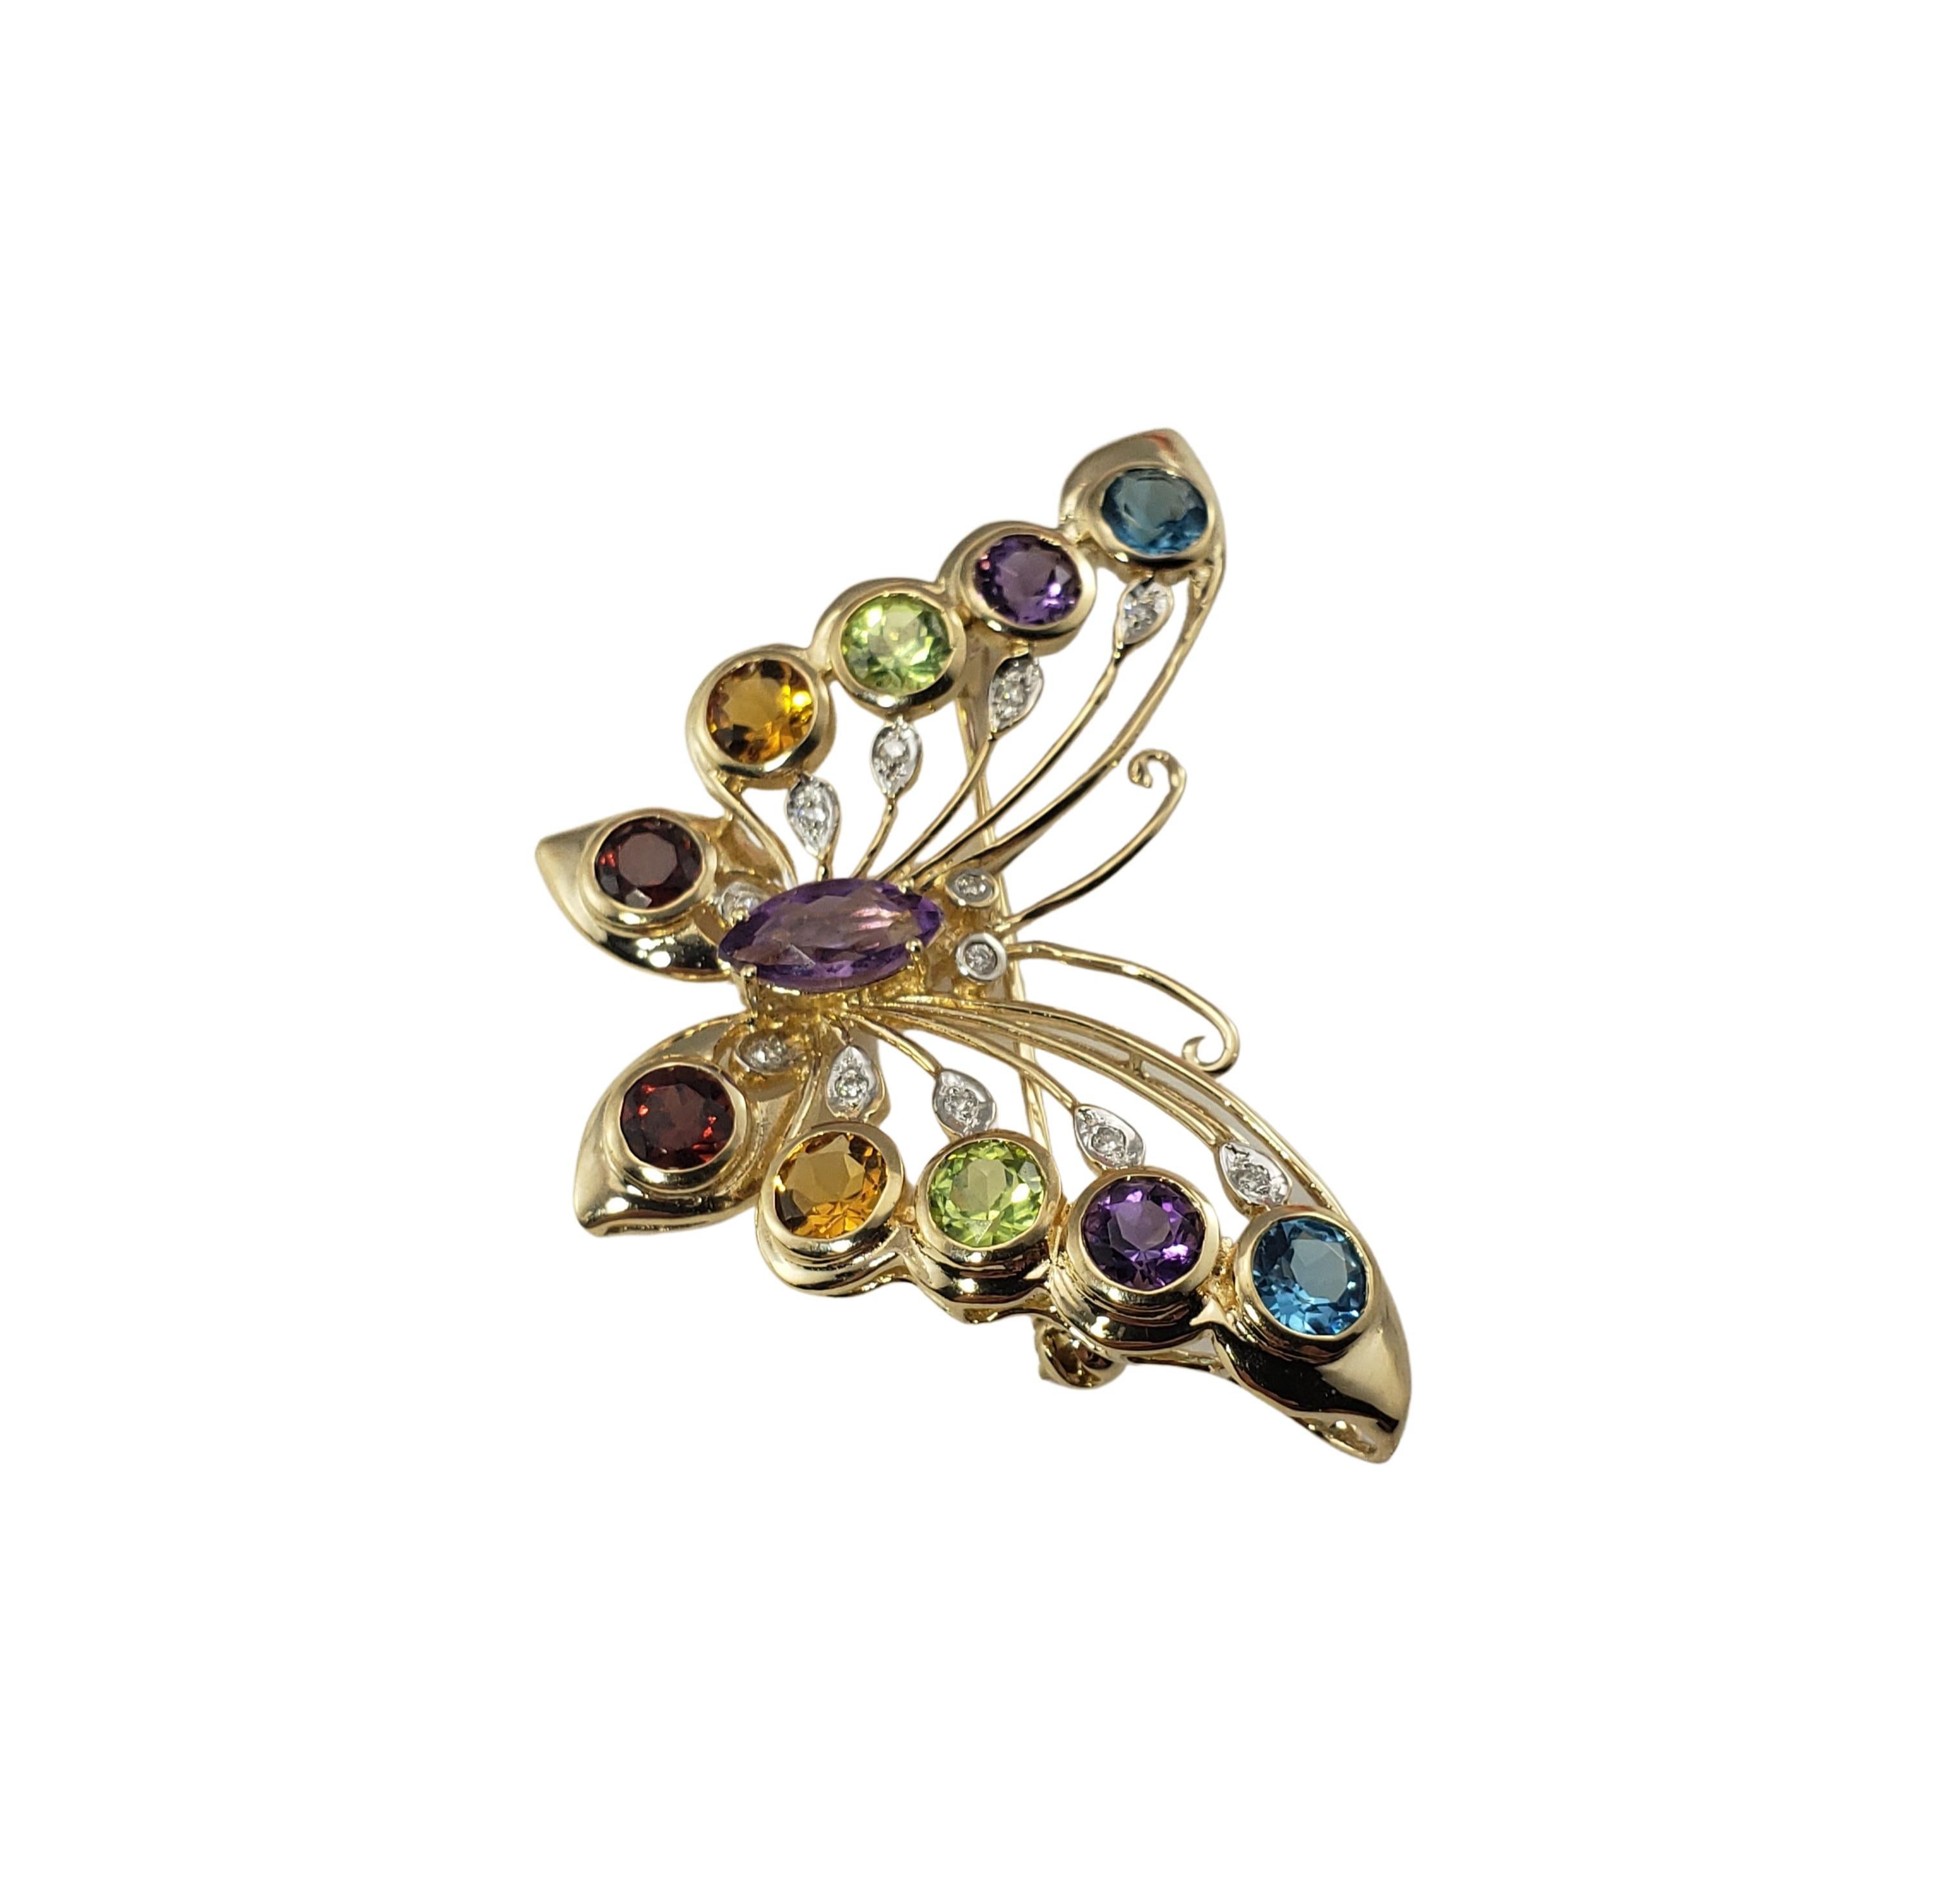 Brilliant Cut 14 Karat Yellow Gold and Gemstone Butterfly Brooch / Pin